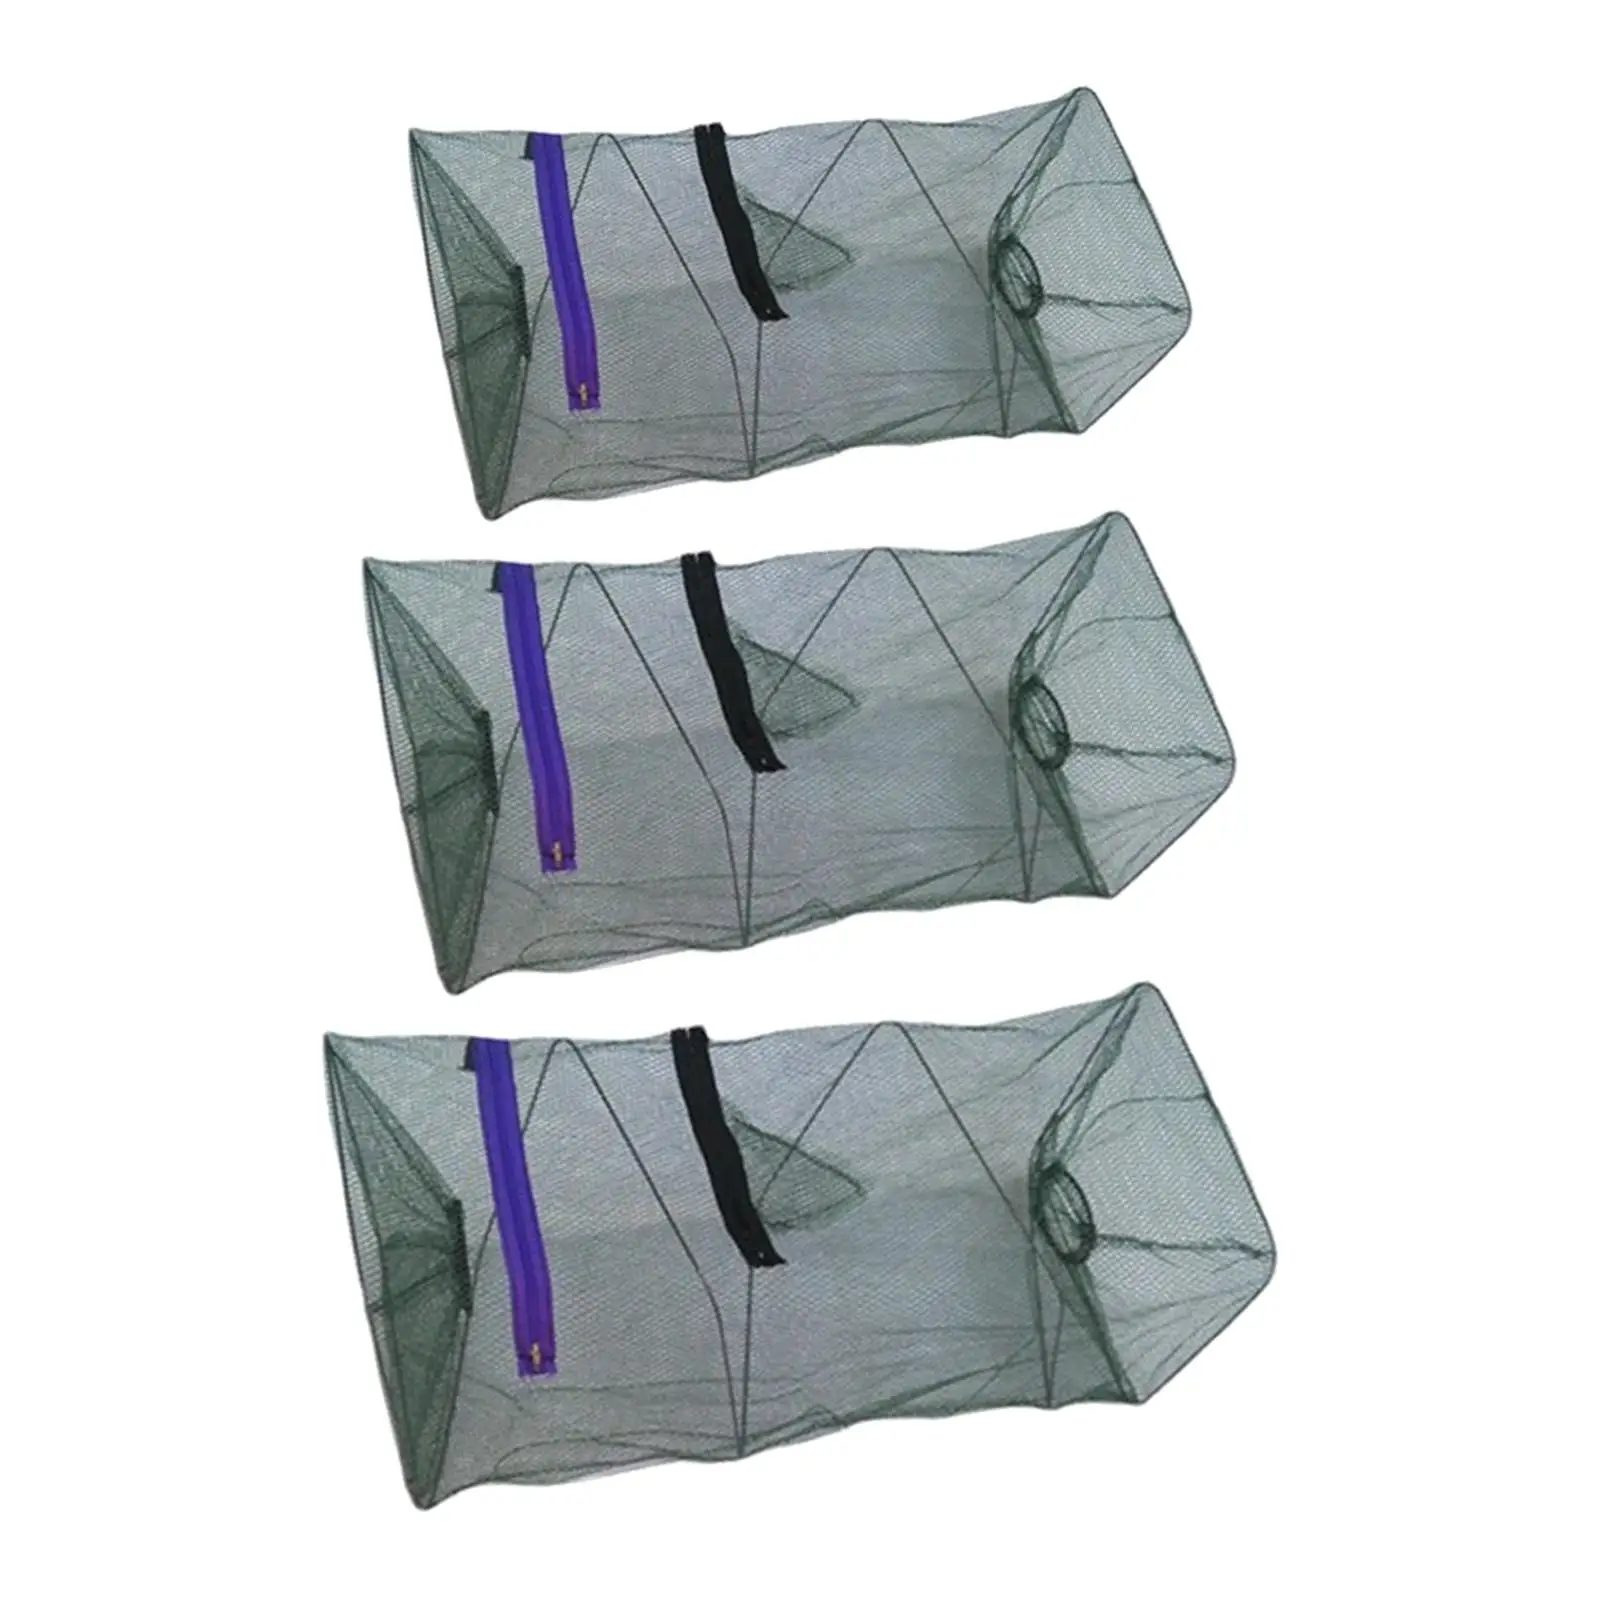 Fishing Bait Trap Net Automatic Fishing Net Catch Shrimp Tool Professional Convenient Durable Lobster Net for Fish Catching Kids